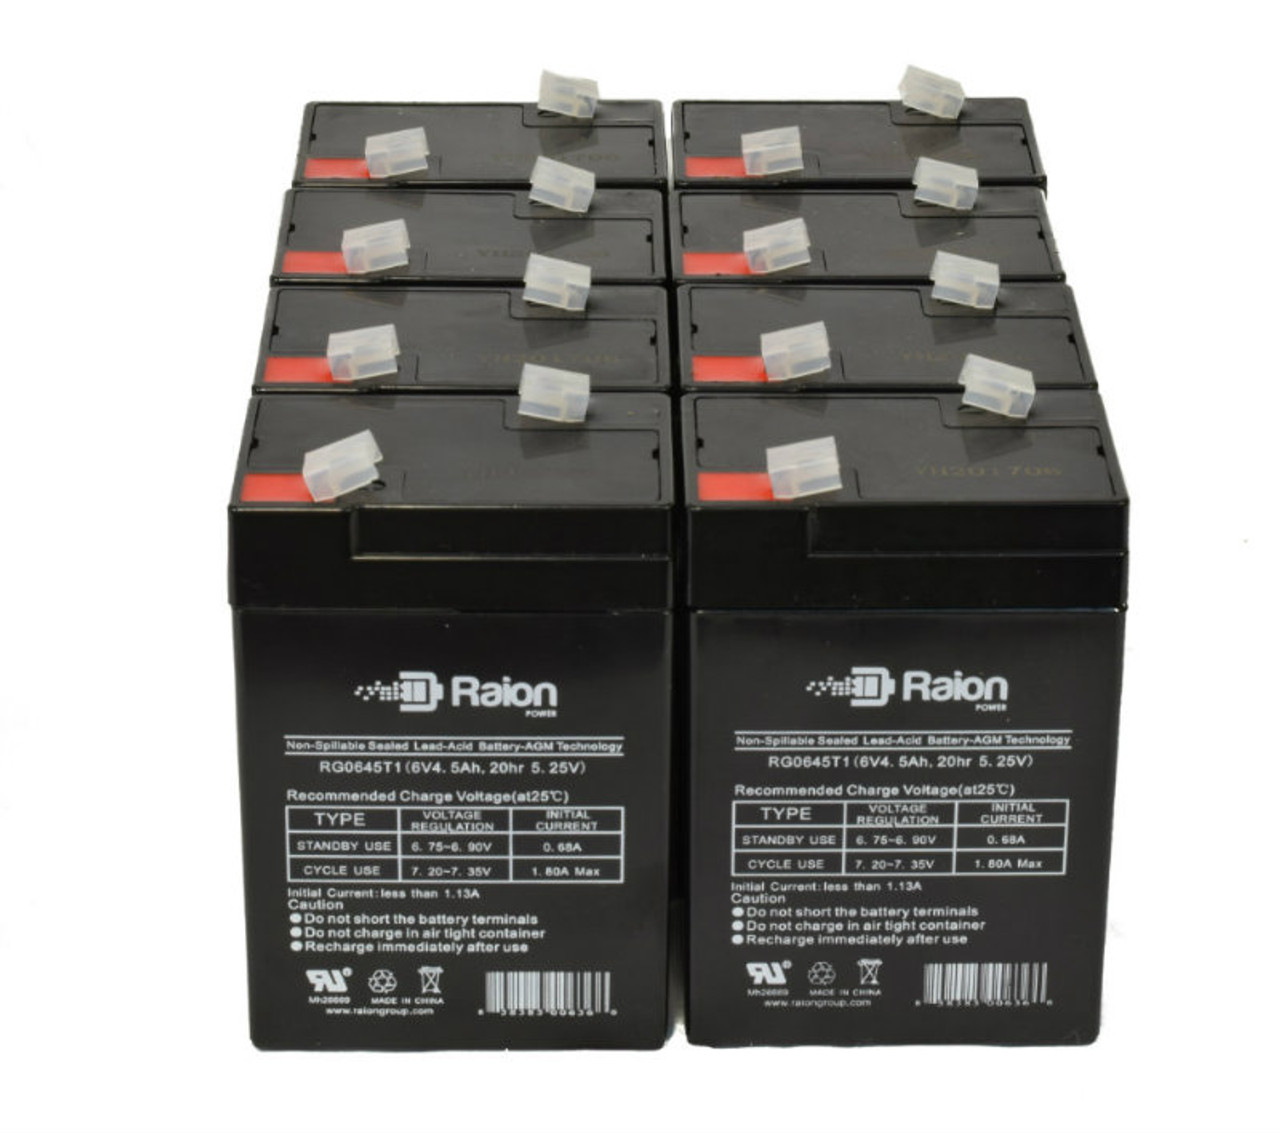 Raion Power 6V 4.5Ah Replacement Emergency Light Battery for Big Beam 2CL6S5 - 8 Pack